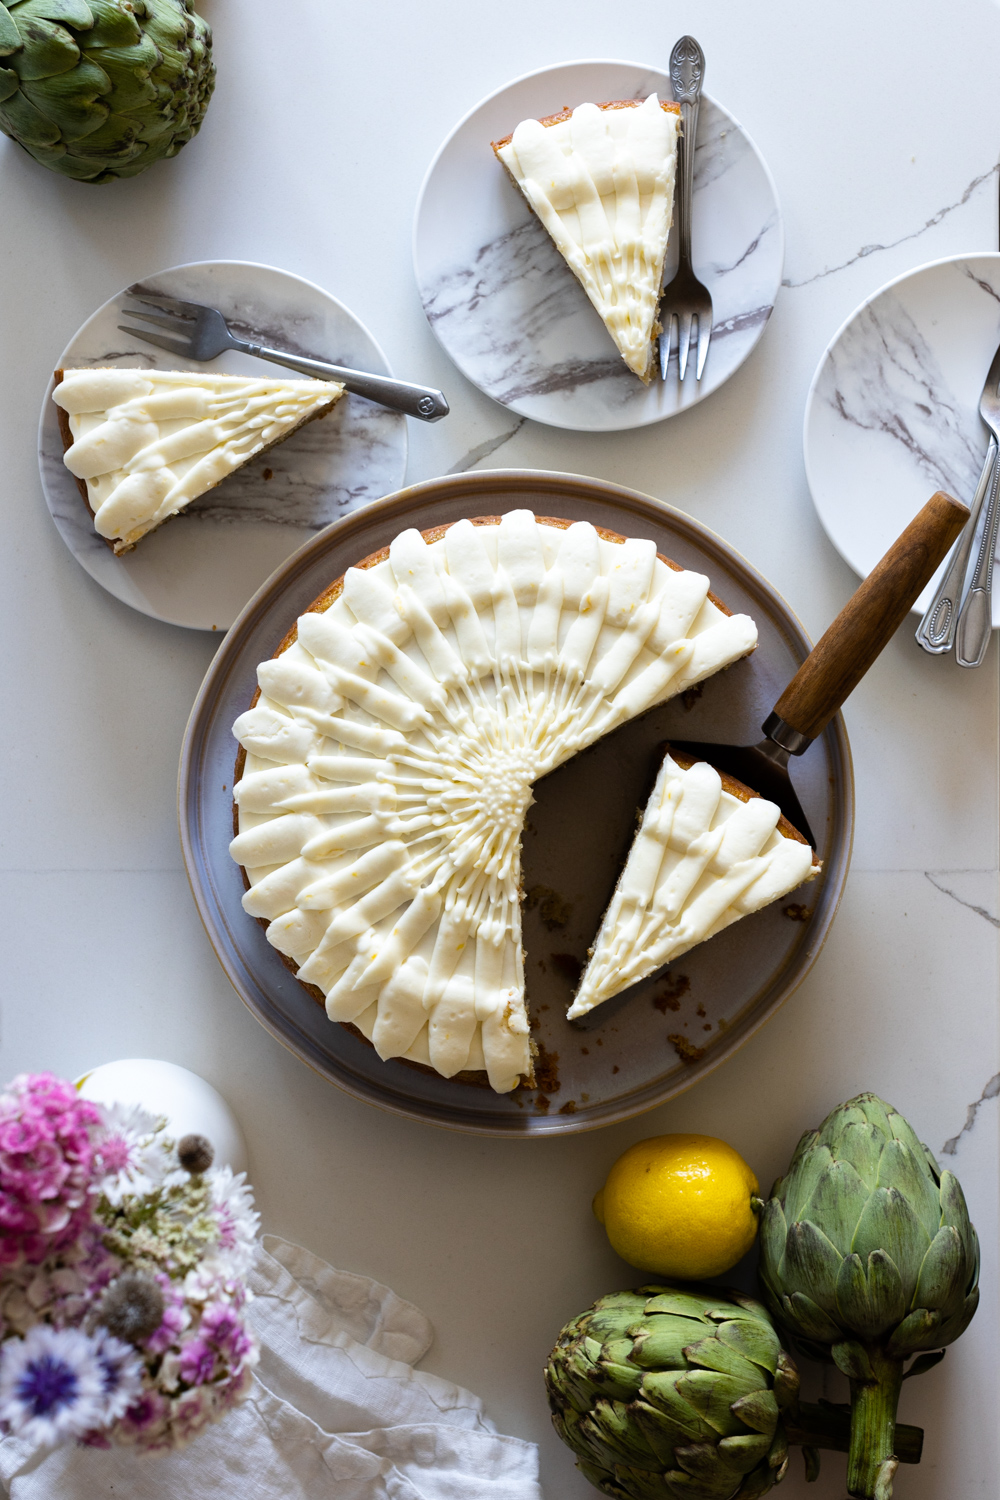 Artichoke Olive Oil Cake with Lemon Cream Cheese Frosting sliced